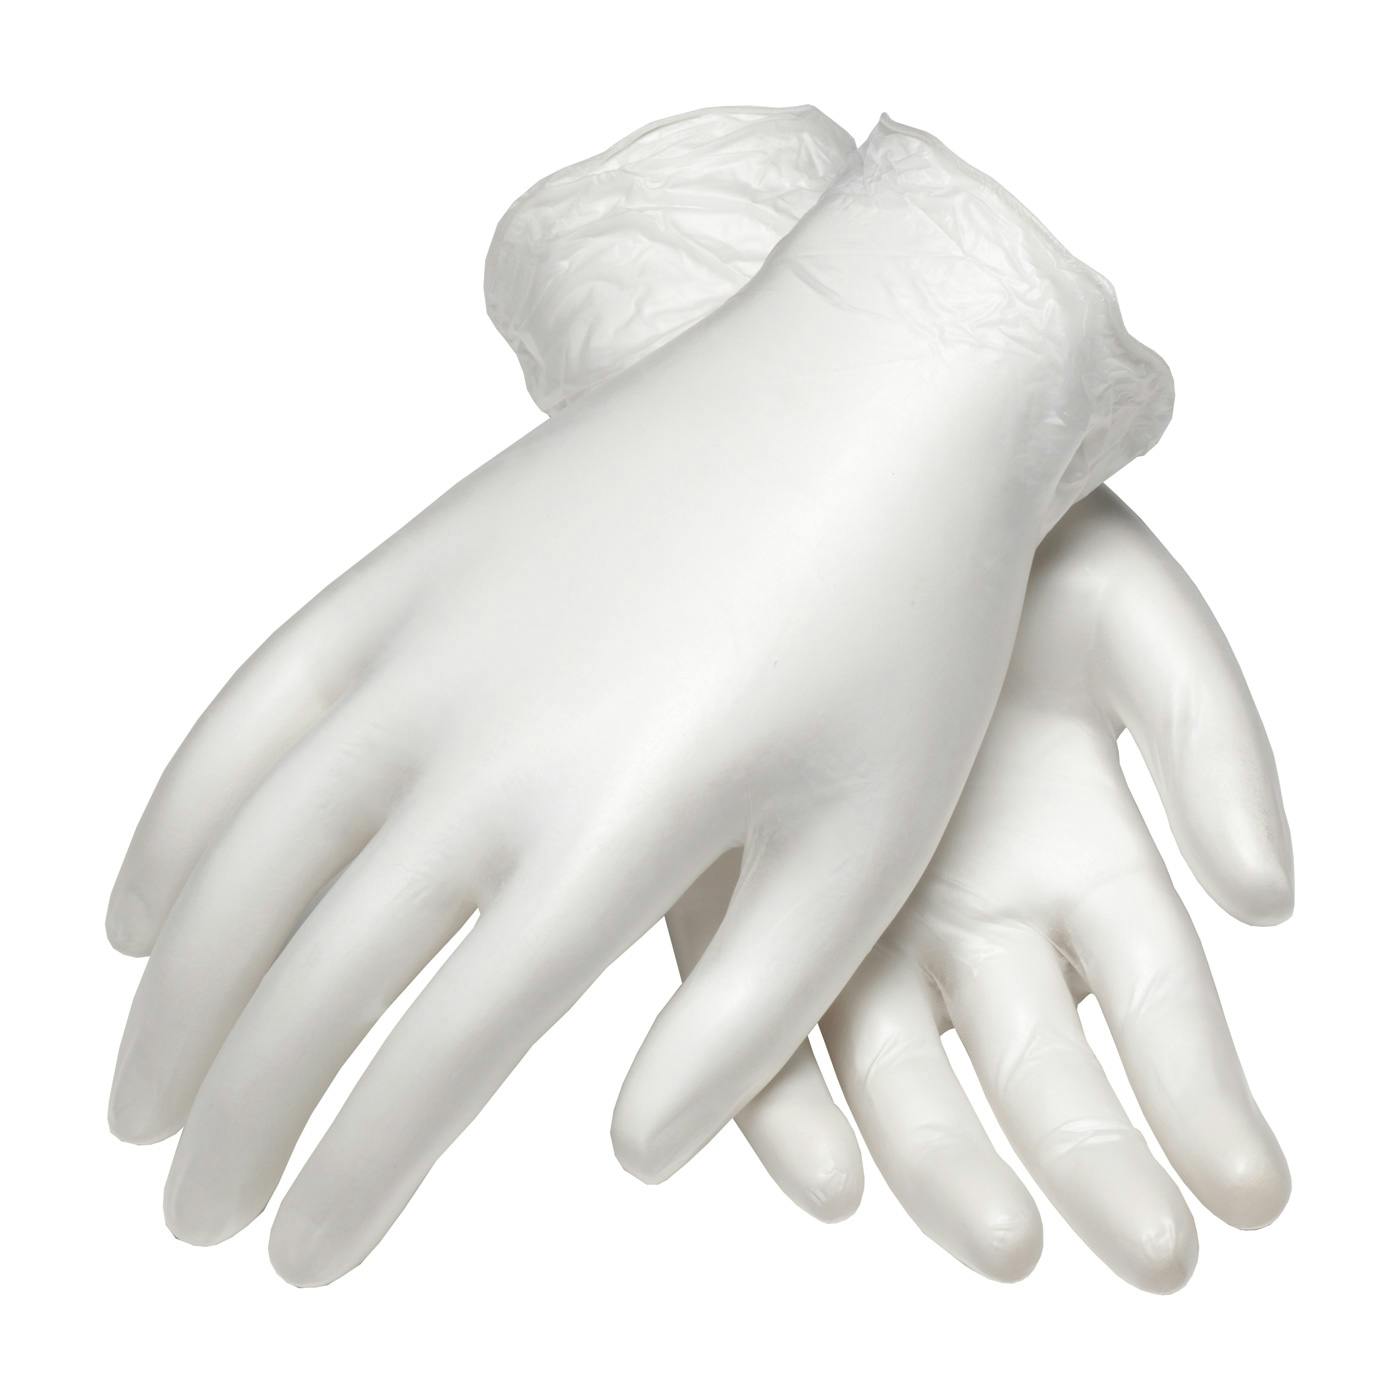 CleanTeam® Single Use Class 100 Cleanroom Vinyl Glove with Finger Textured Grip - 9.5" (100-2824)_0